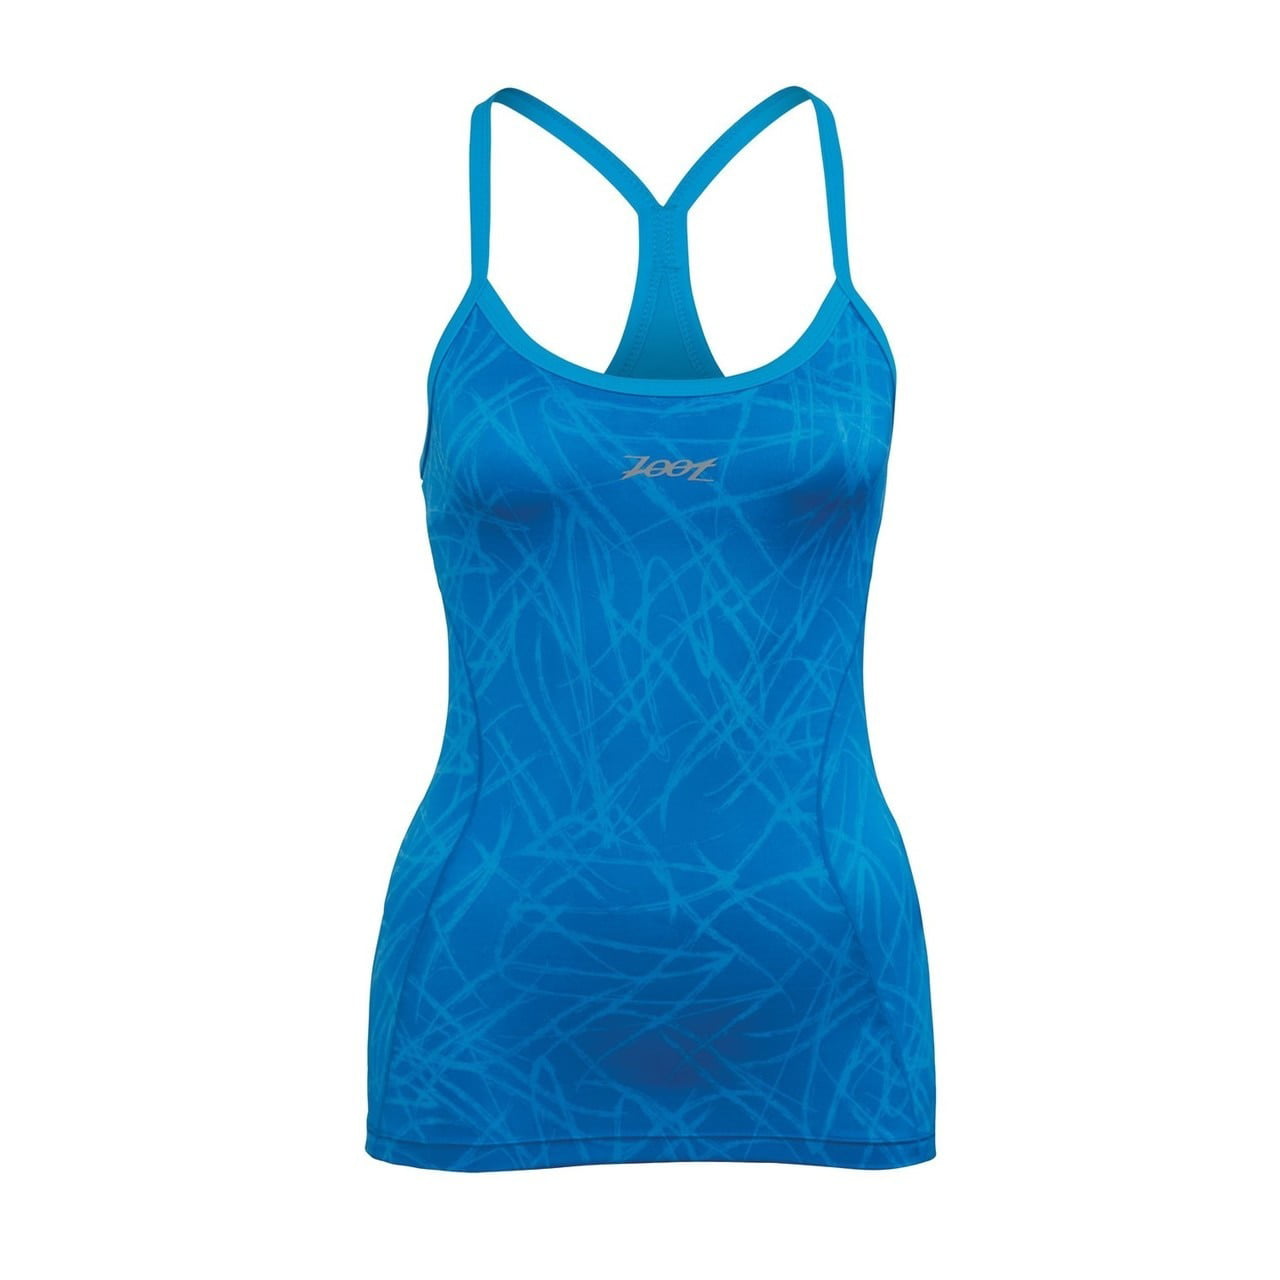 Details about   Zoot Women's Performance Tri Cami Maliblue Static XS 